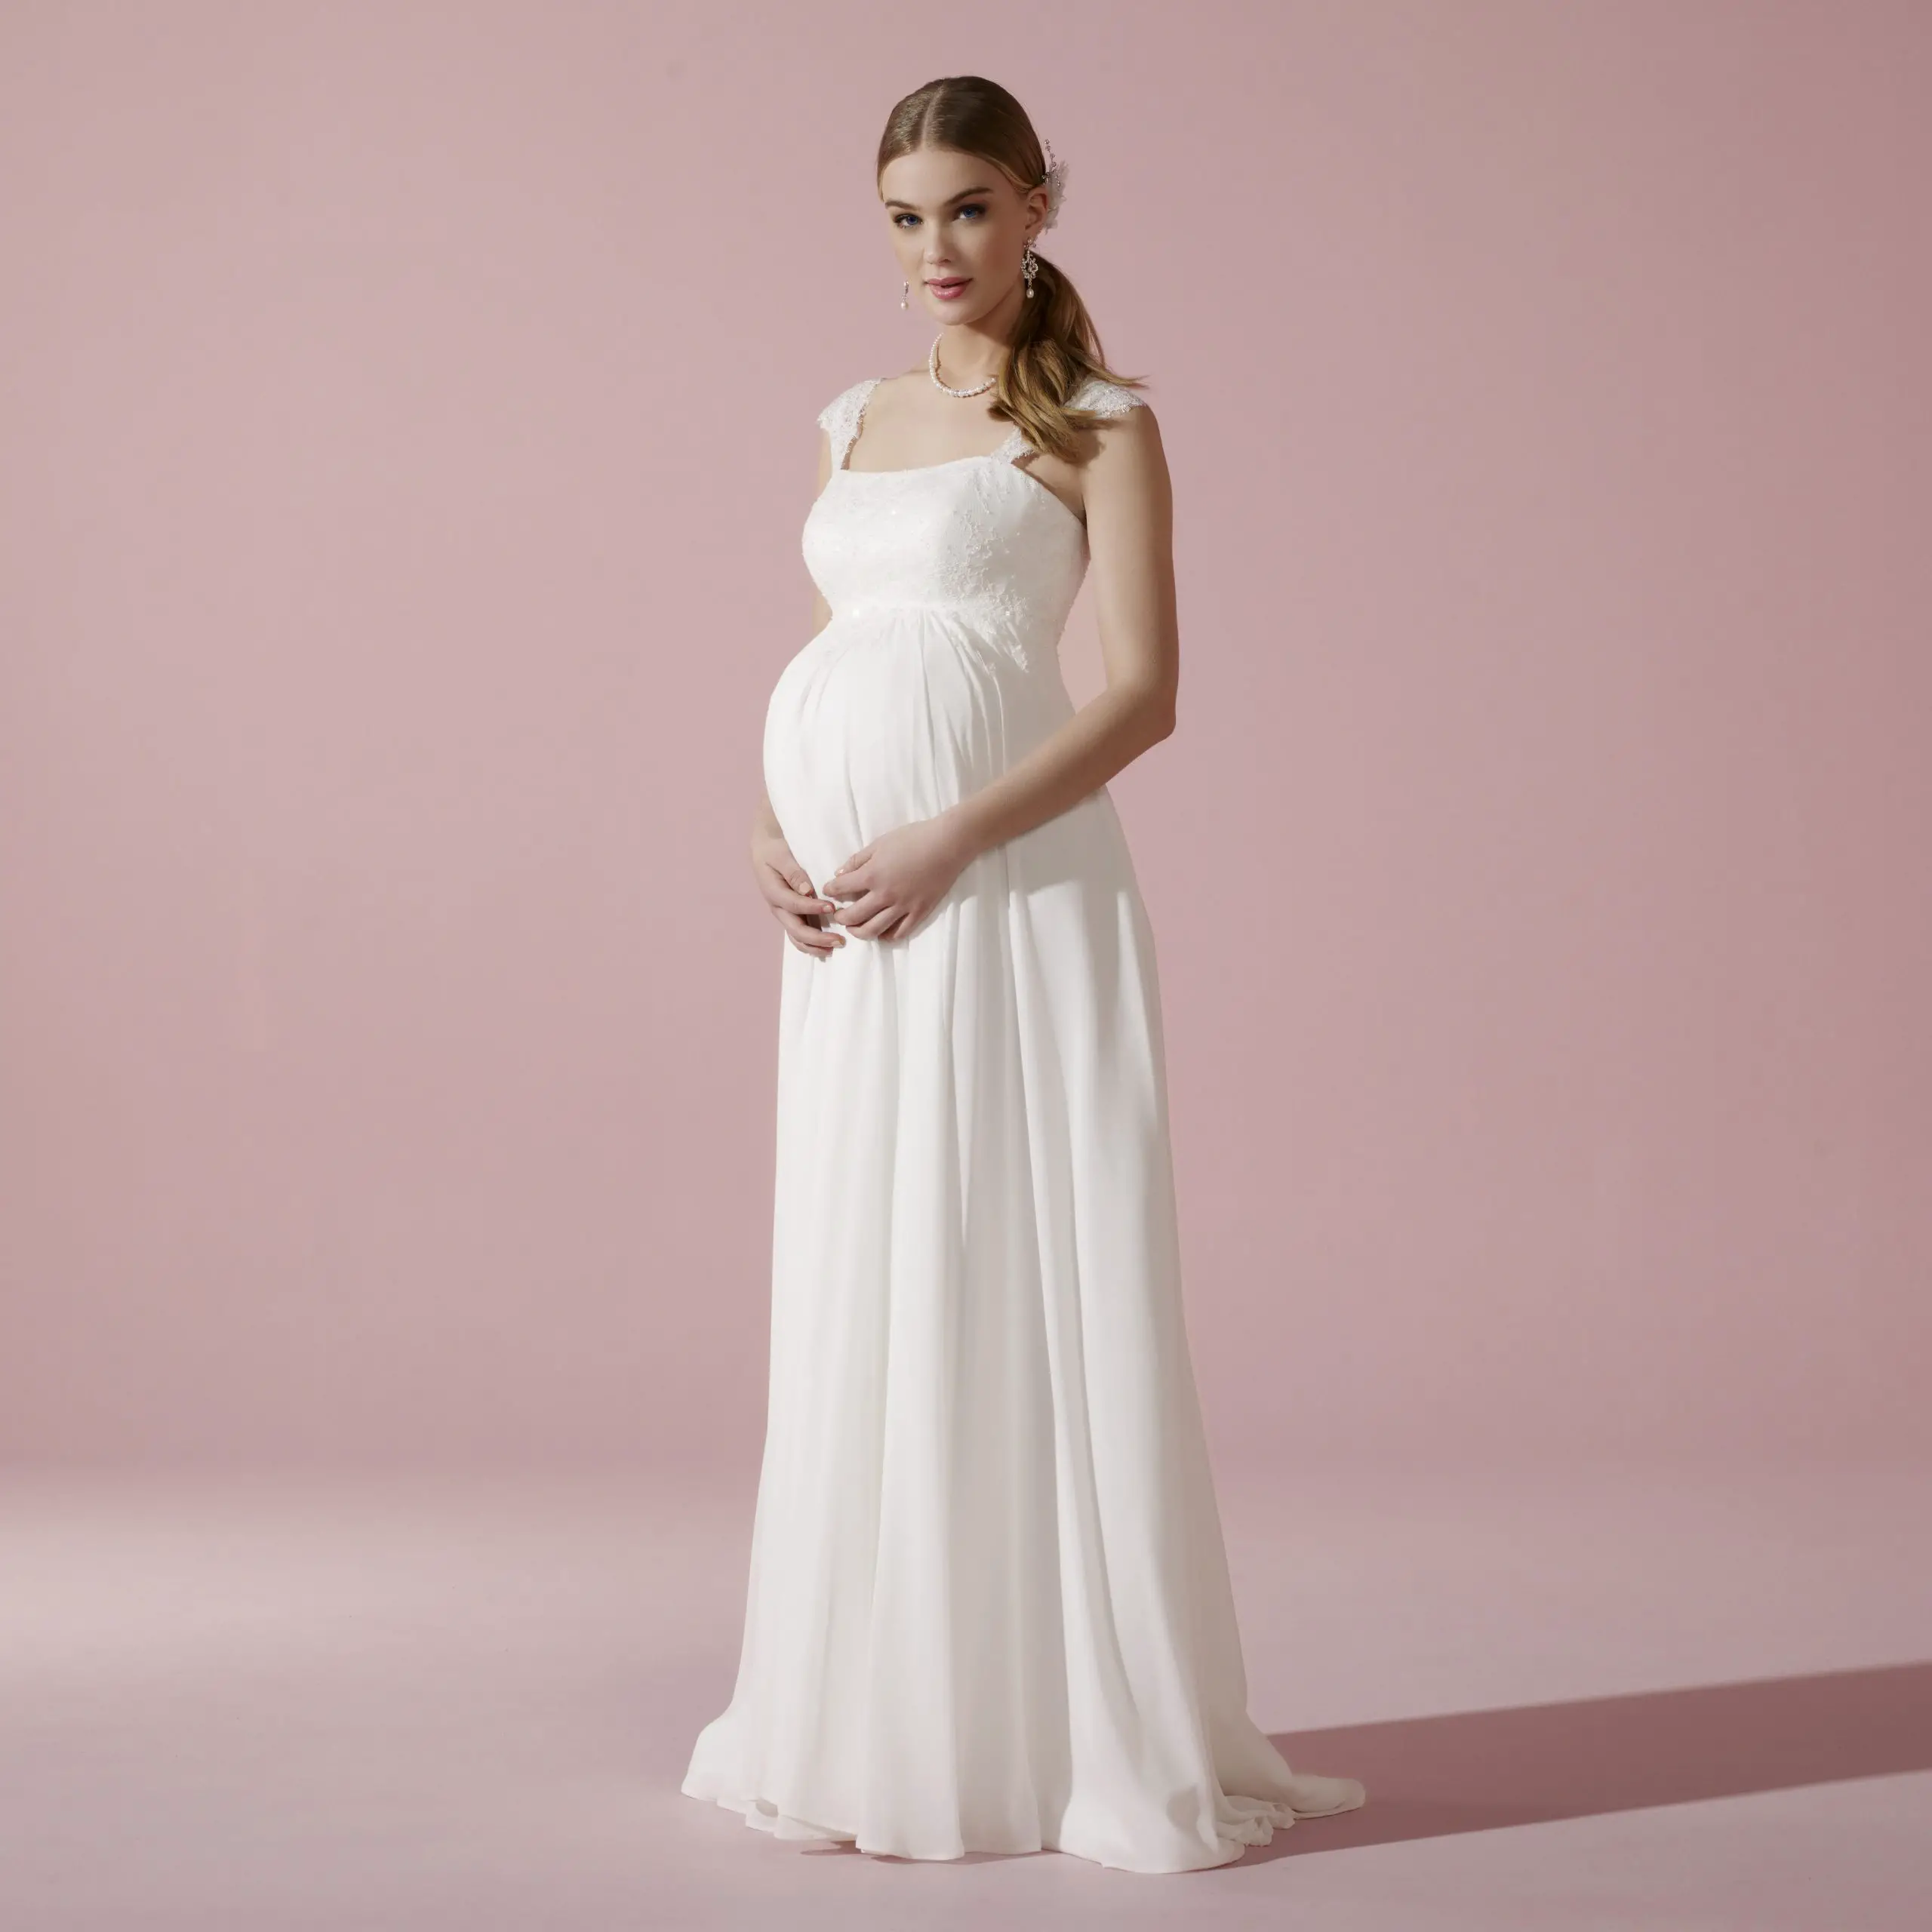 Wedding Dresses For Pregnant Brides Uk : Where To Find Maternity ...